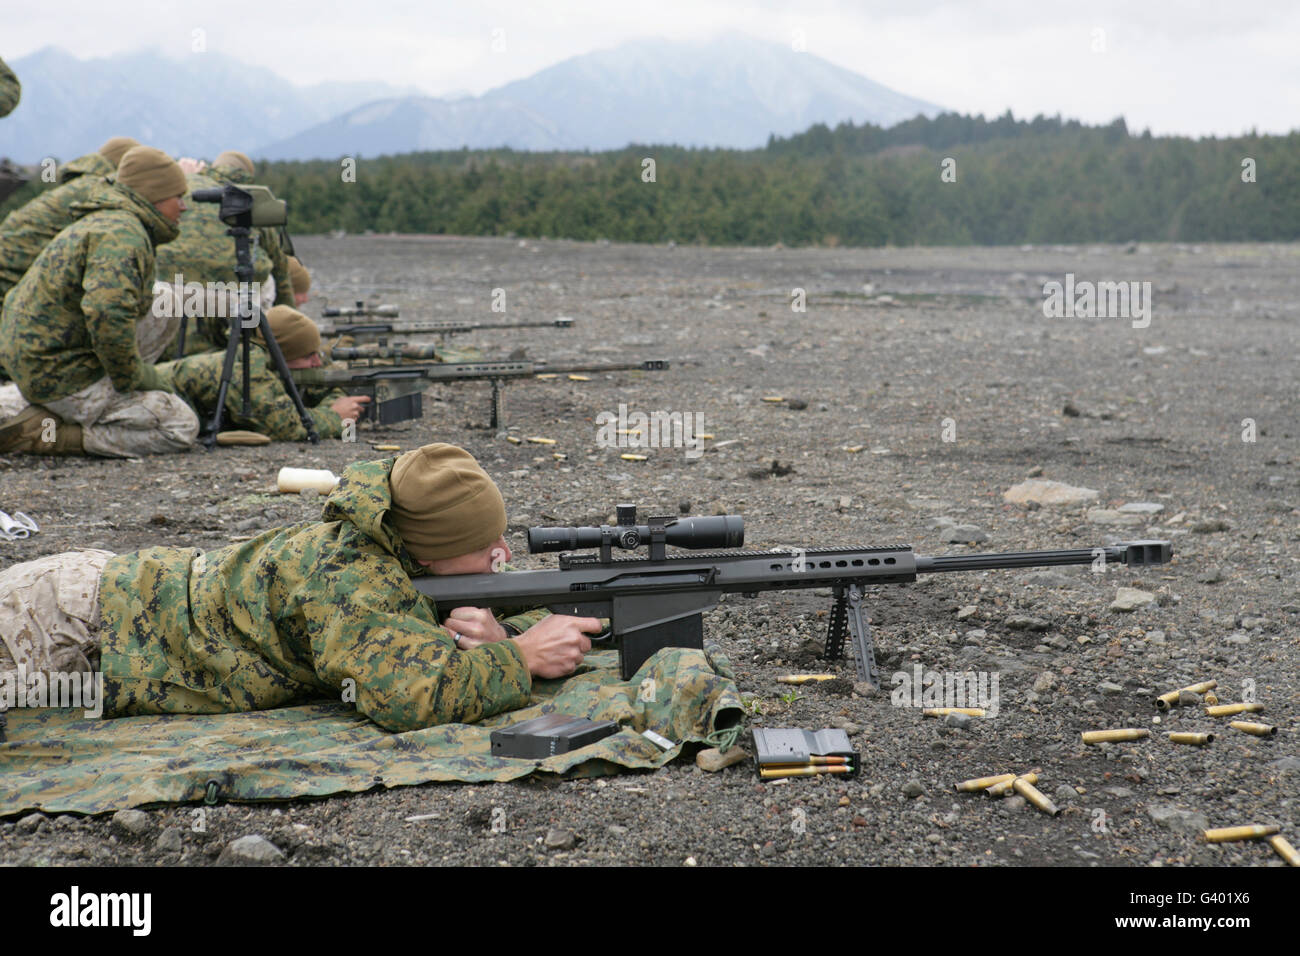 U.S. Marines fire an M107 special application scoped rifle at Camp Fuji, Japan. Stock Photo